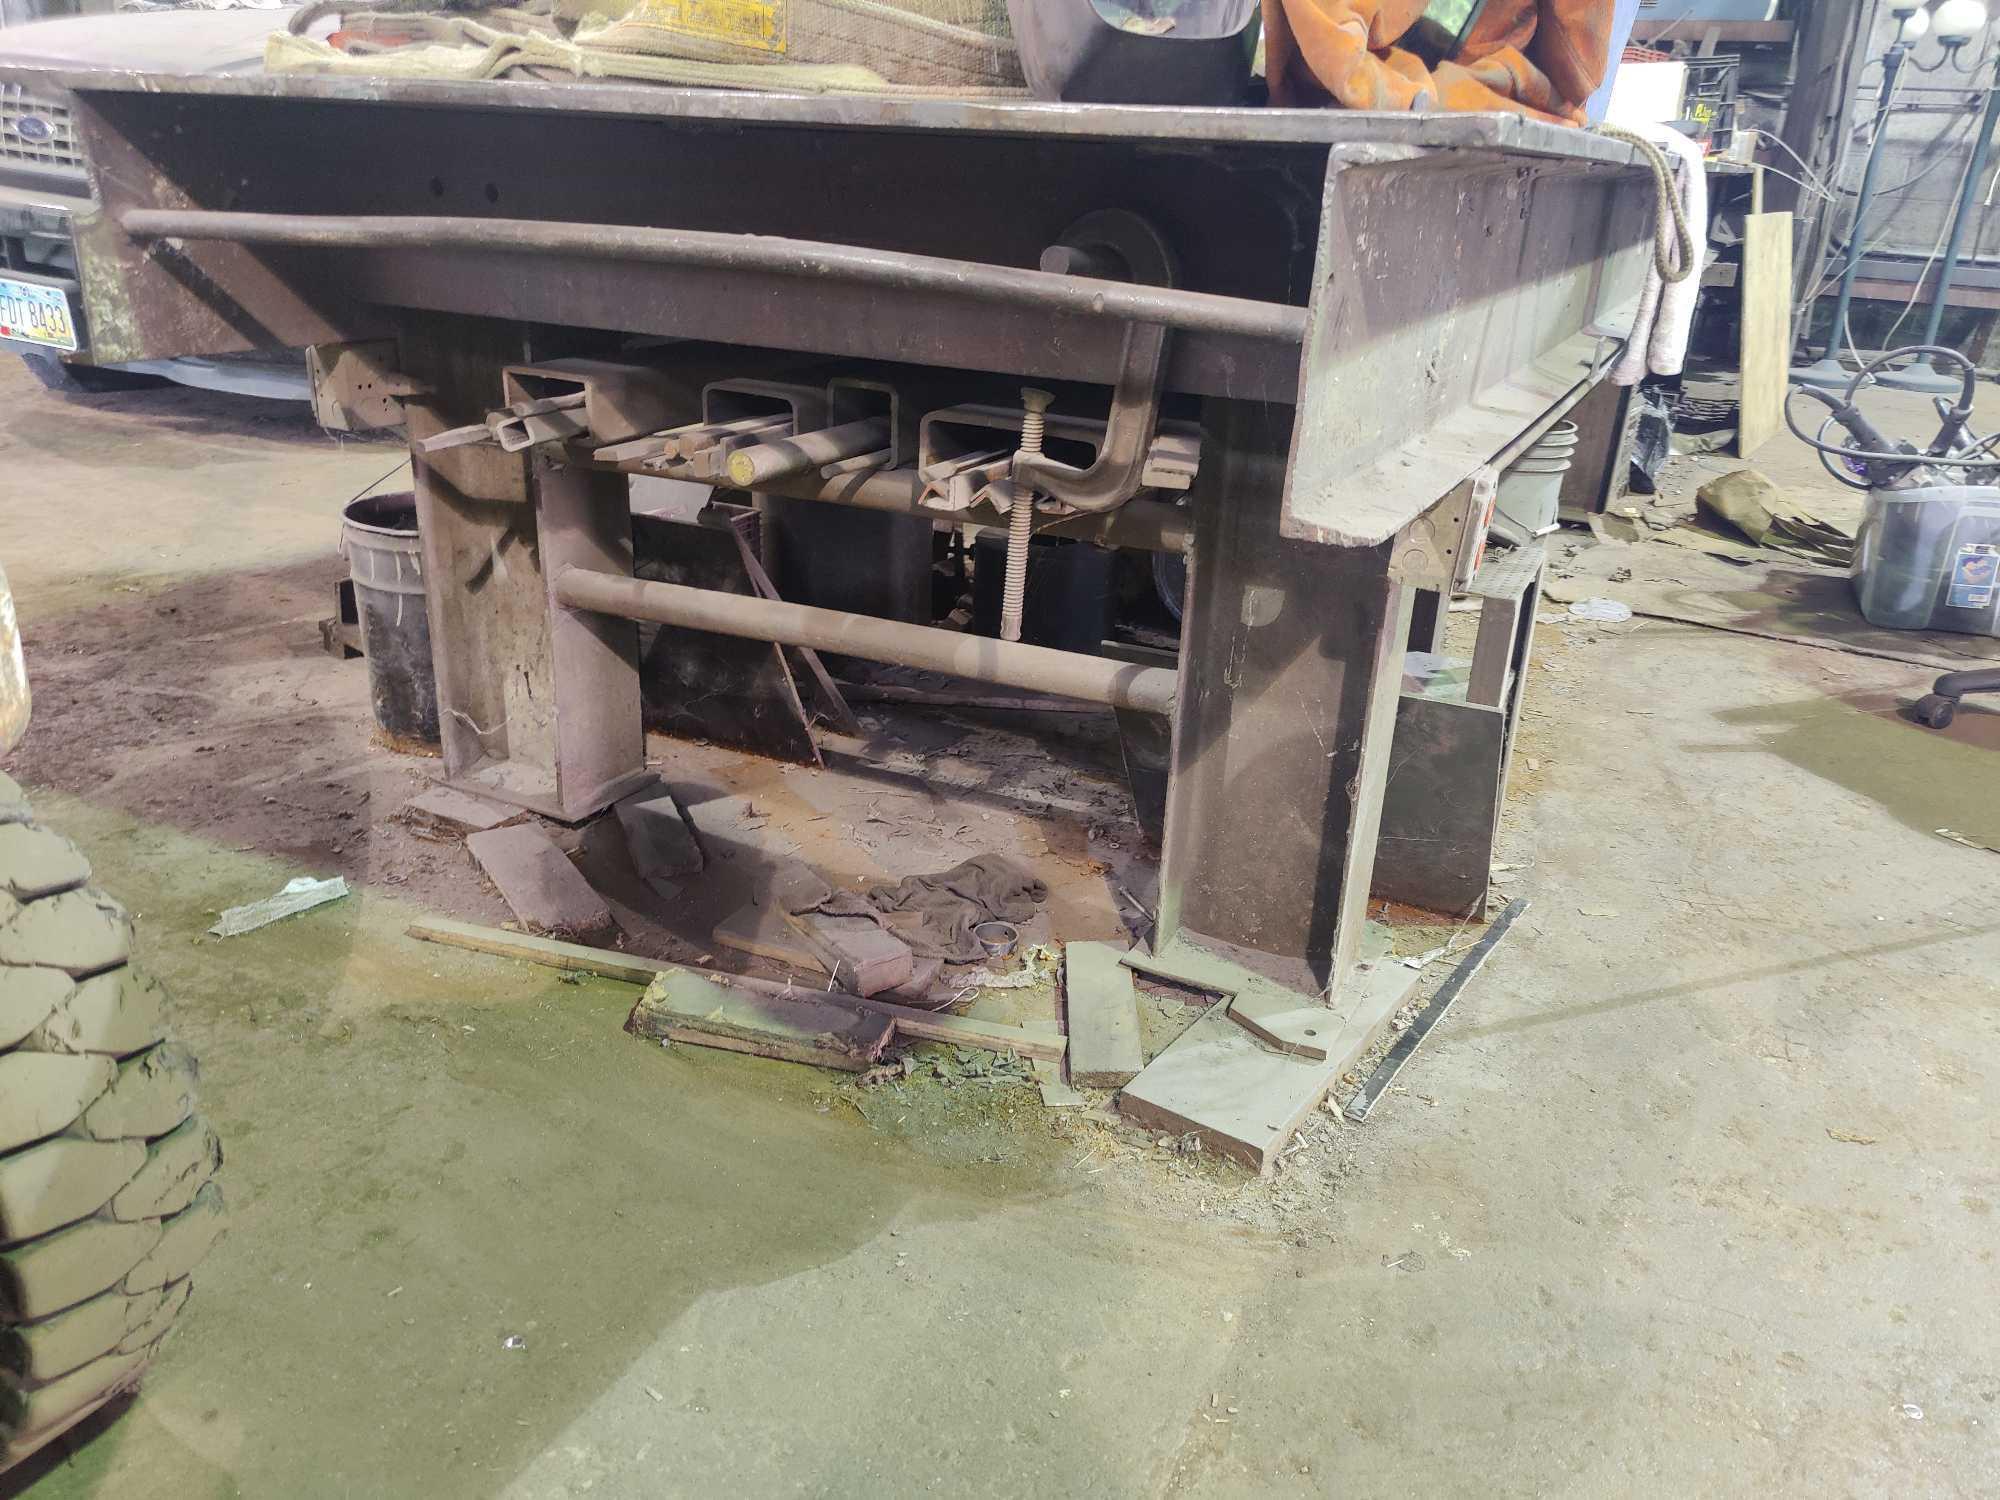 Heavy Duty Work/Welding Bench with Contents